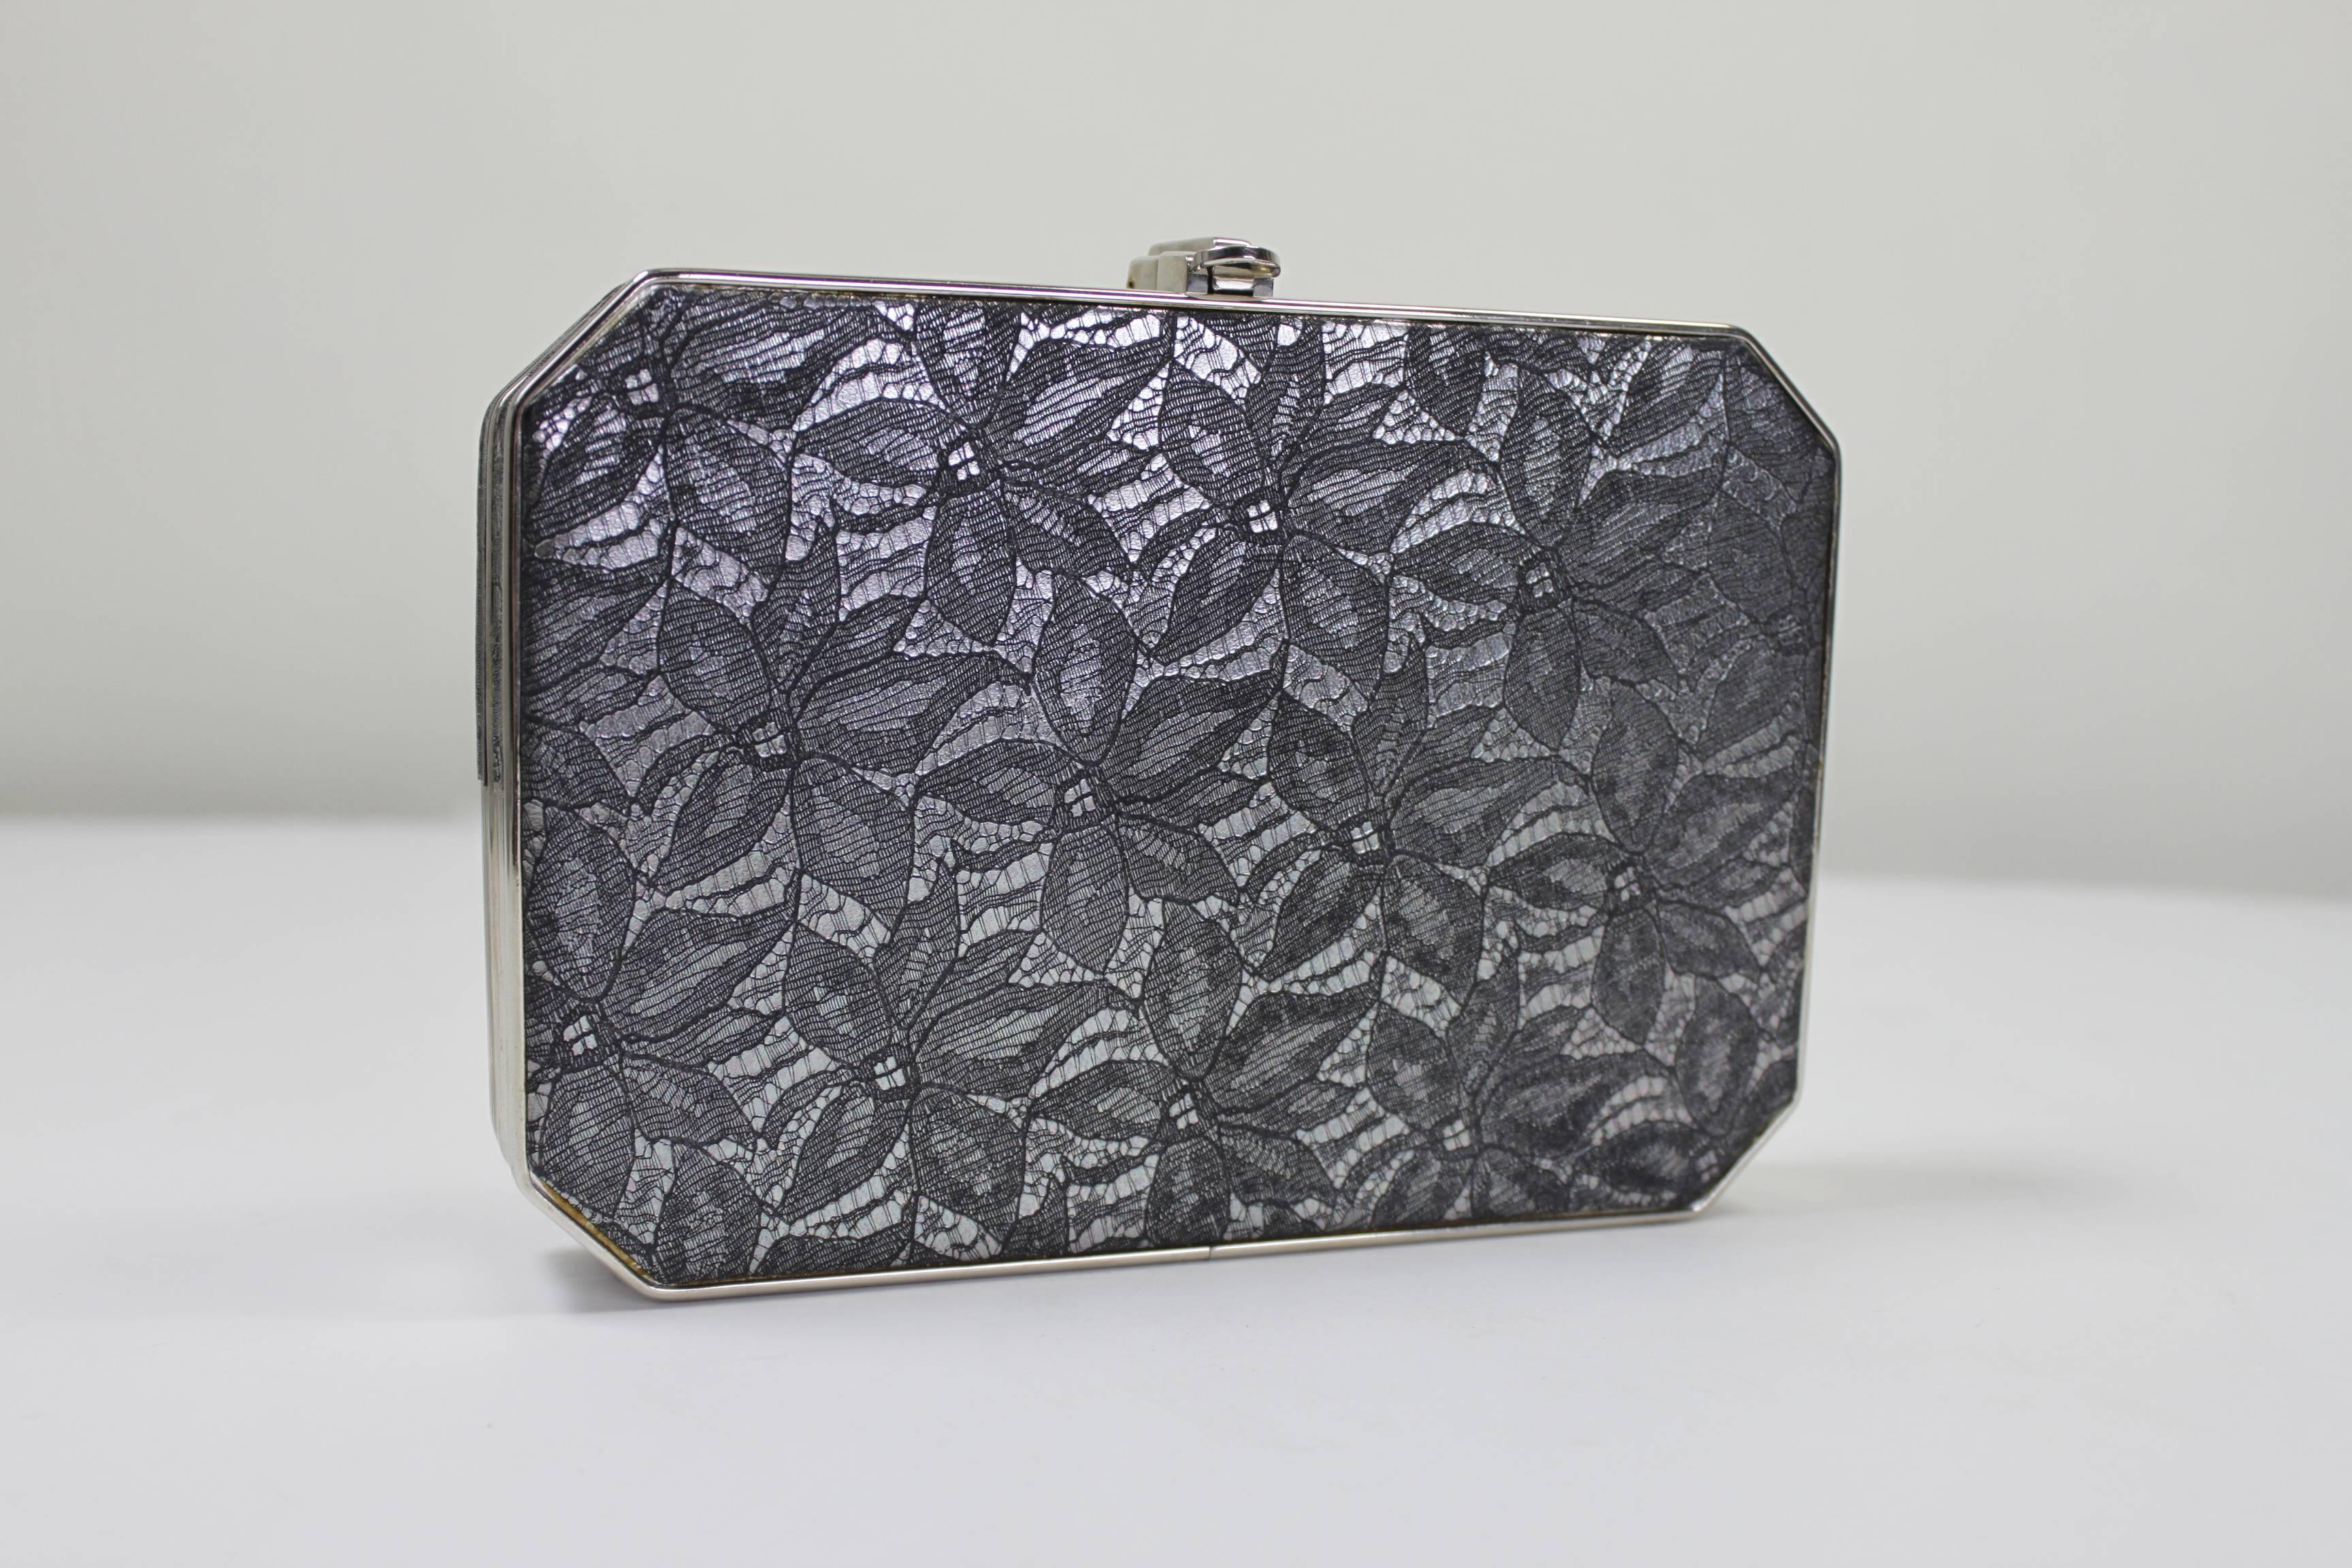 Women's Fendi Silver and Black Lace Evening Clutch with Iridescent Sheen